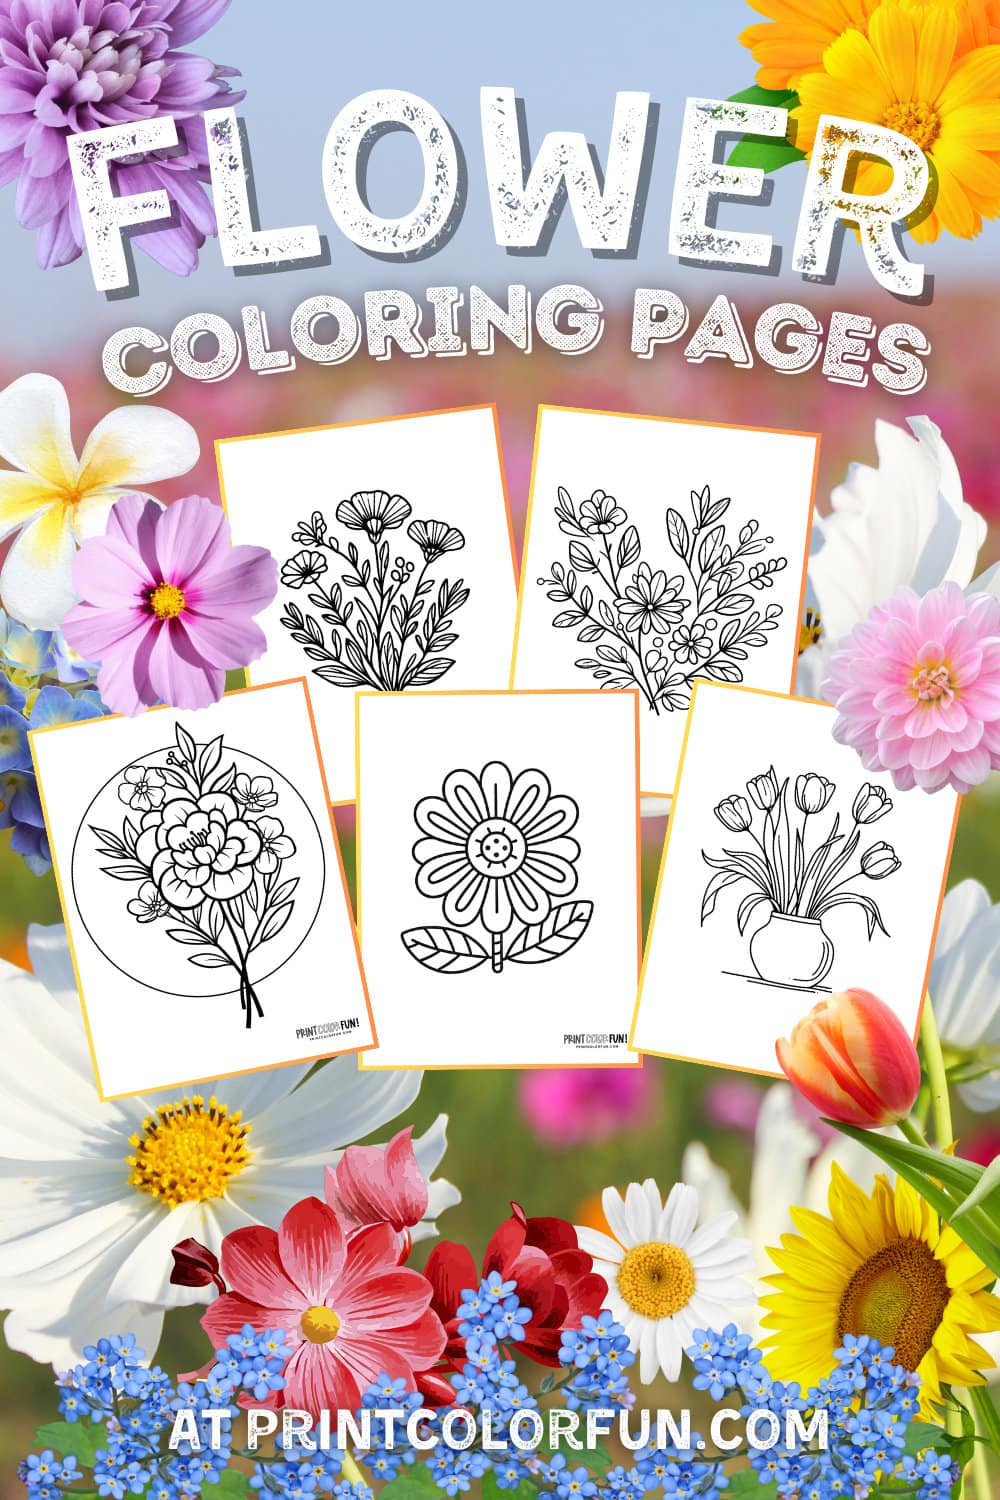 Flower coloring pages and floral clipart from PrintColorFun com